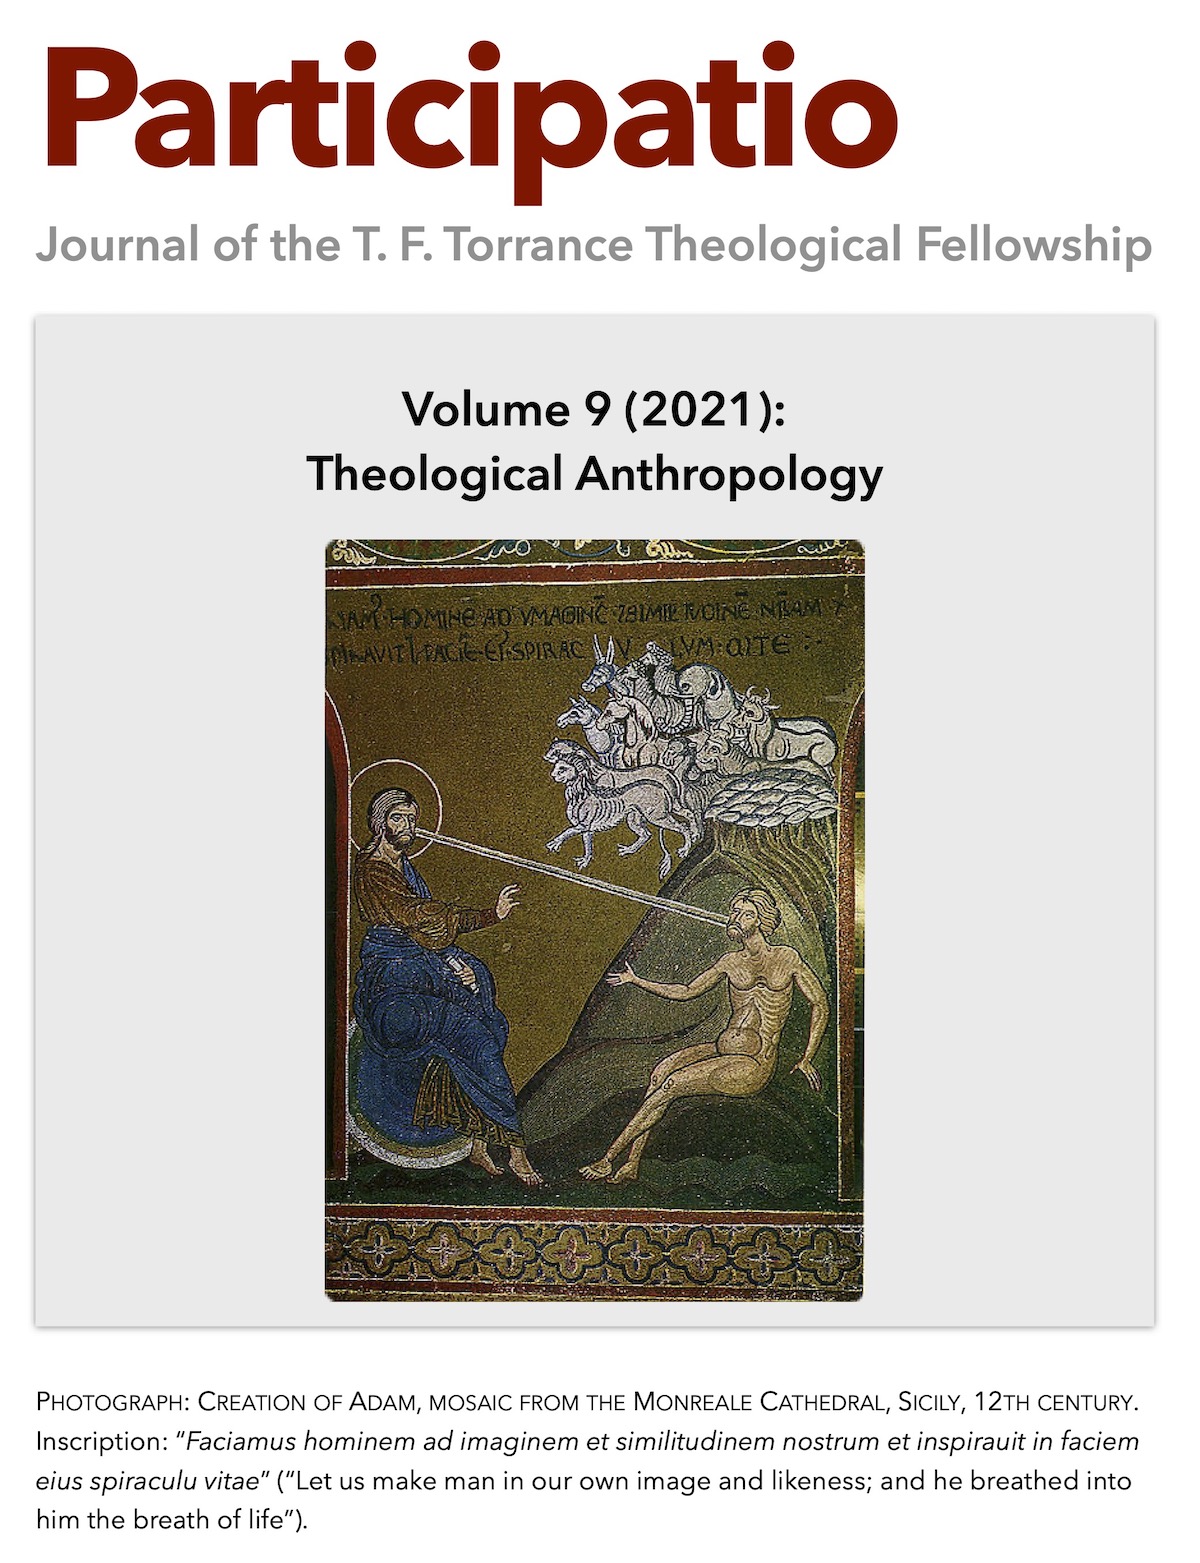 Participatio 2021, Volume 9 Anthropology cover page